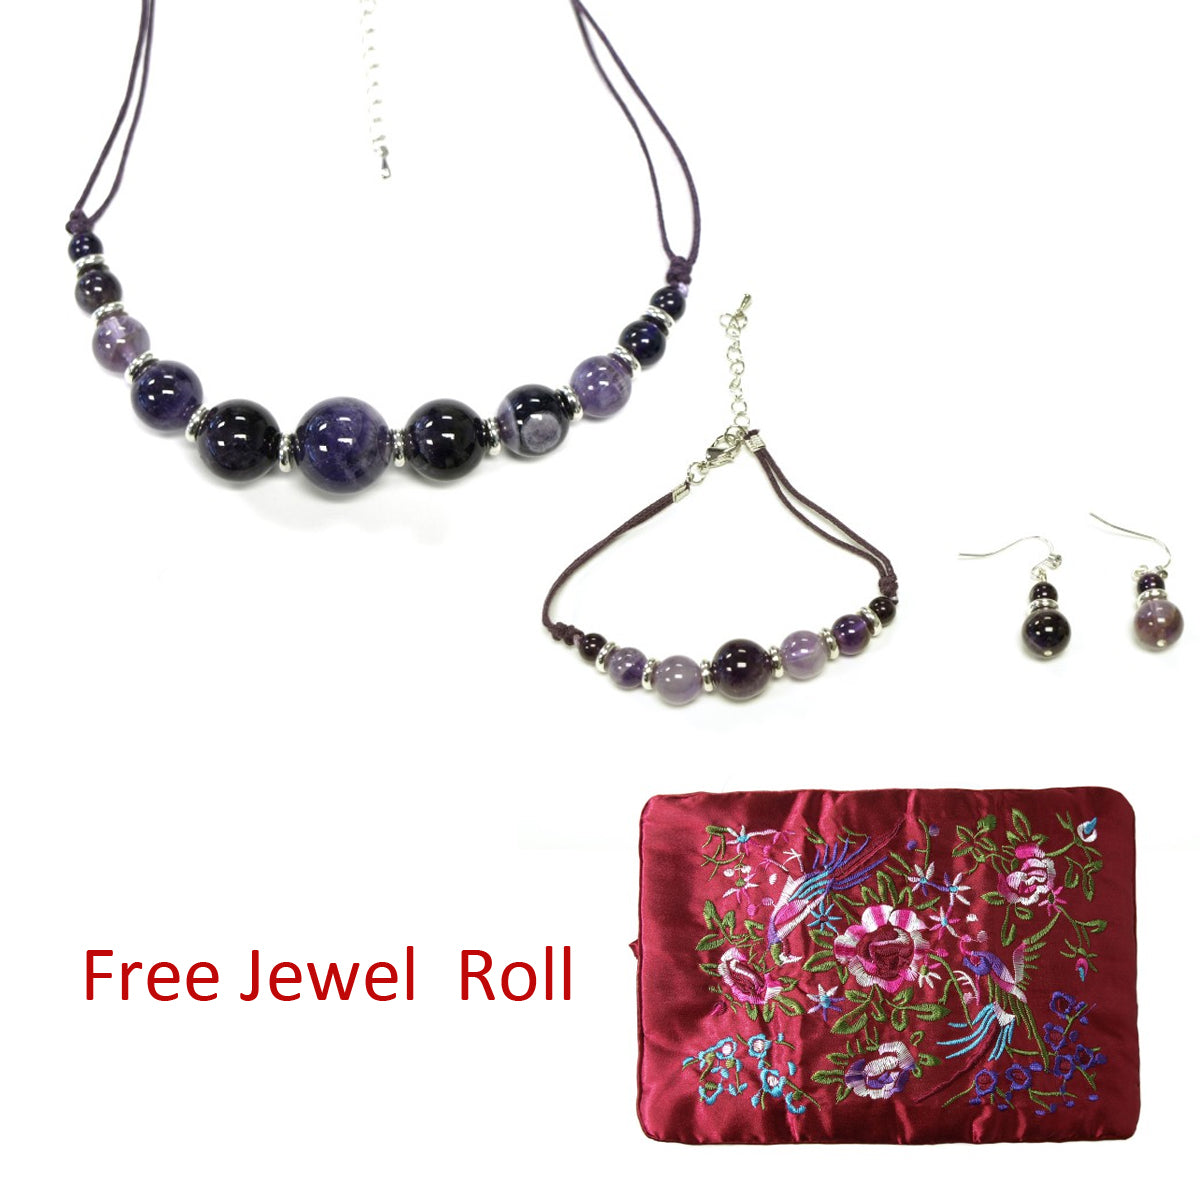 Round Purple Quartz Beads Necklace, Bracelet, and Earrings Jewelry Set + Large Burgundy Silk Embroidered Jewelry Roll